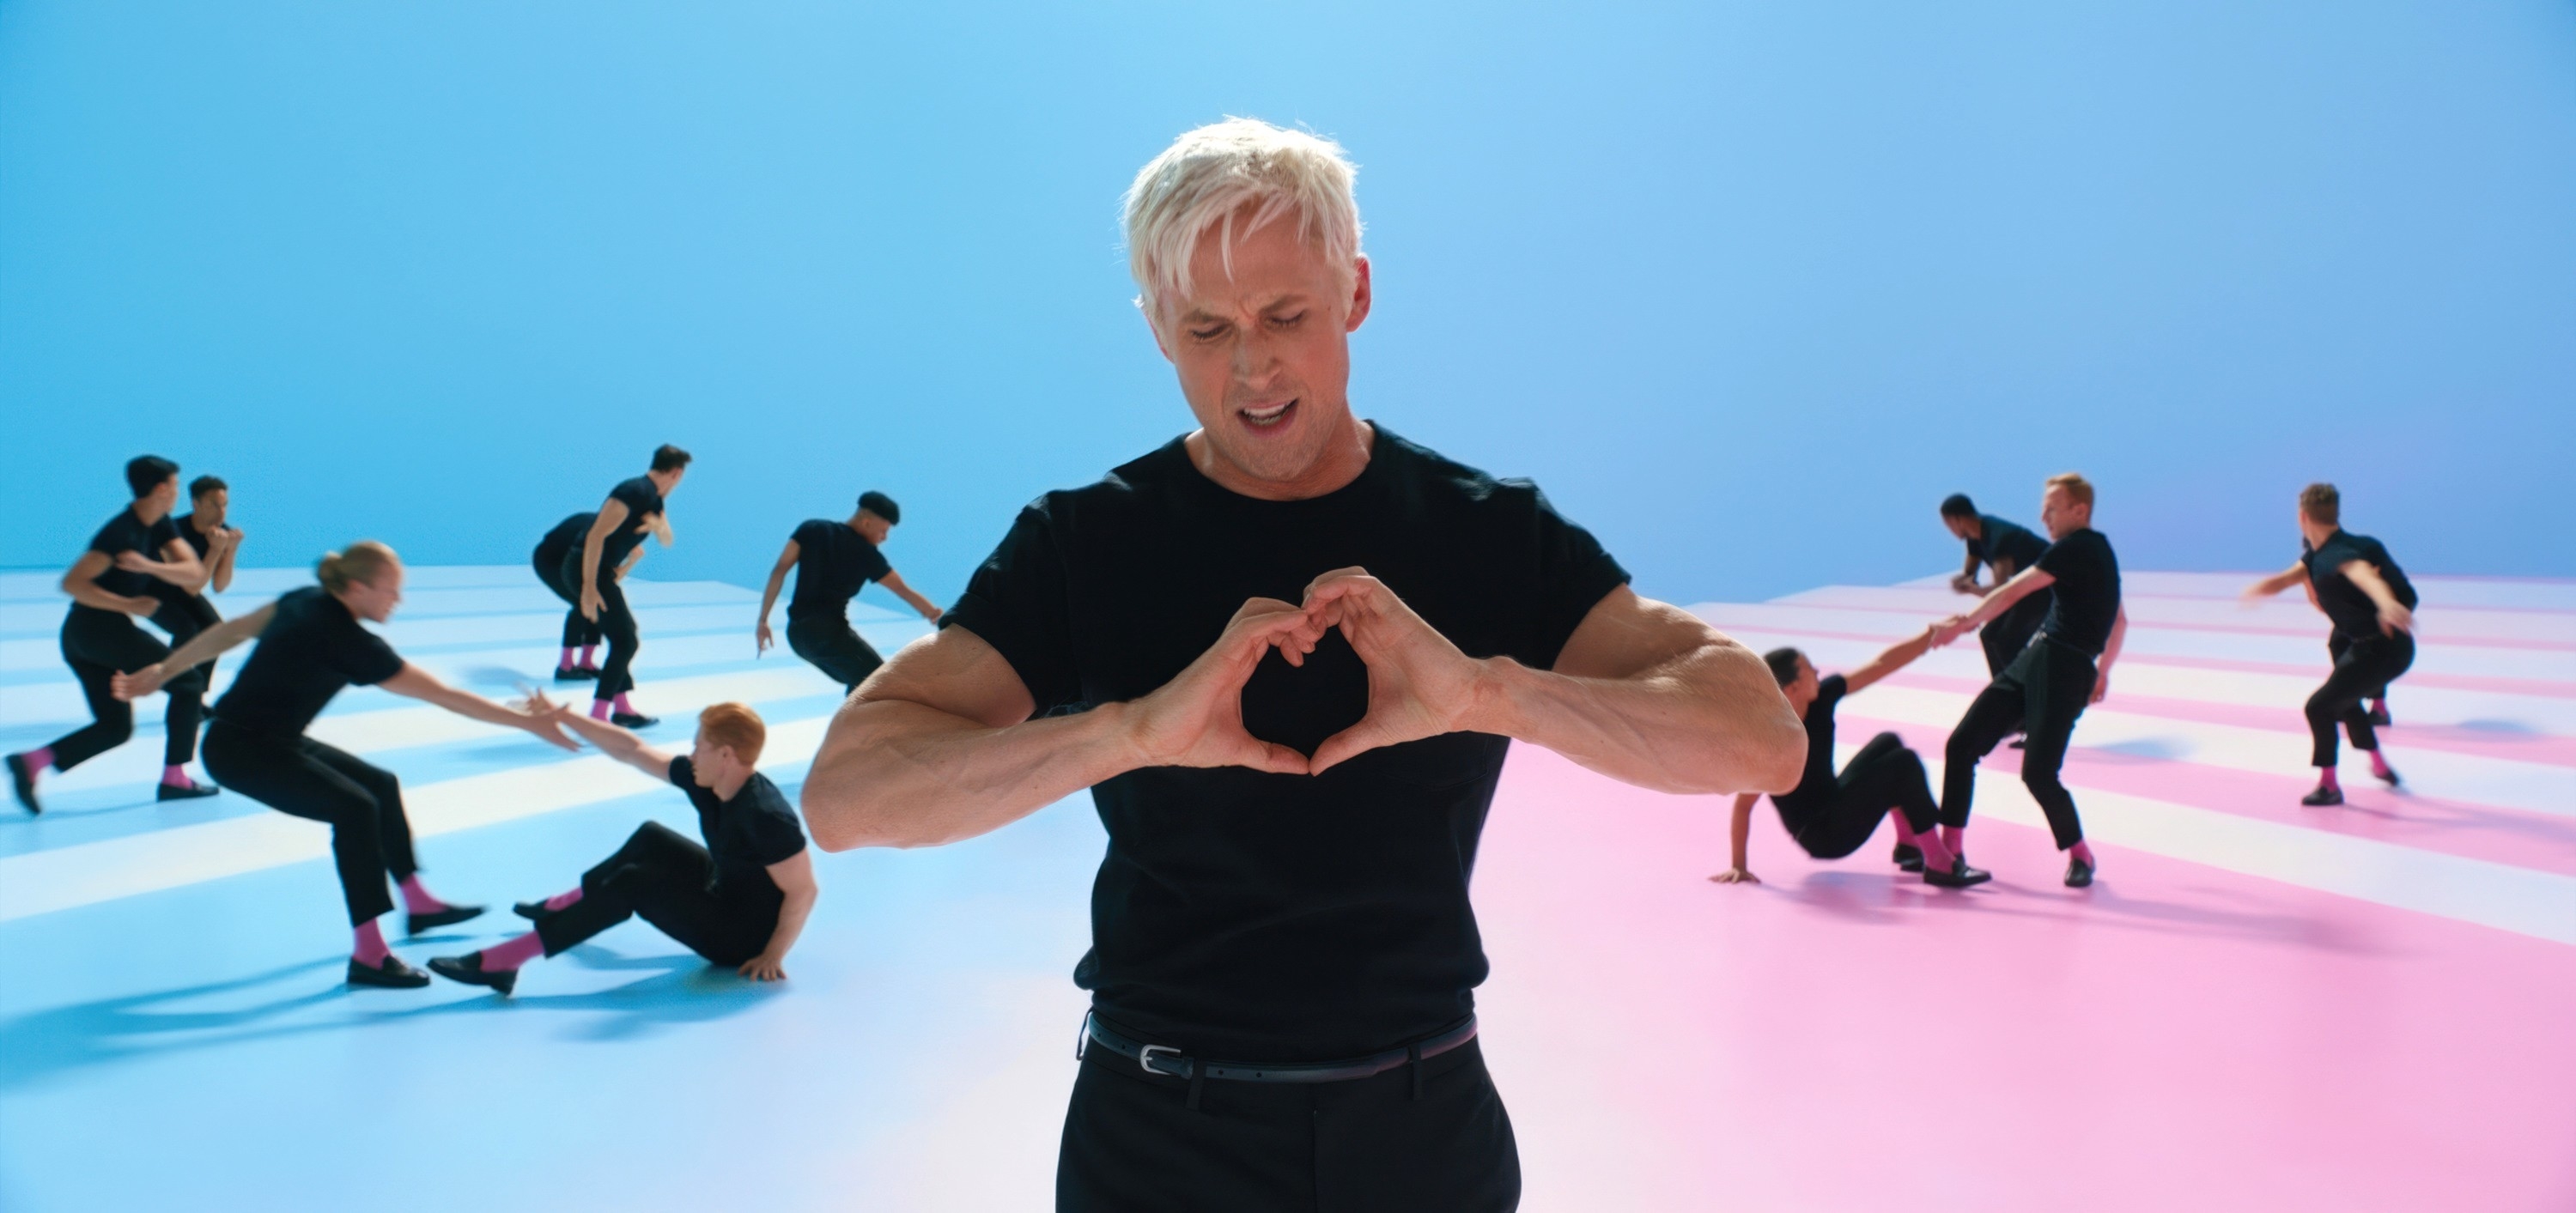 Ryan Gosling as Ken making a heart shape with his hands, surrounded by dancers in matching outfits, on a vibrant stage